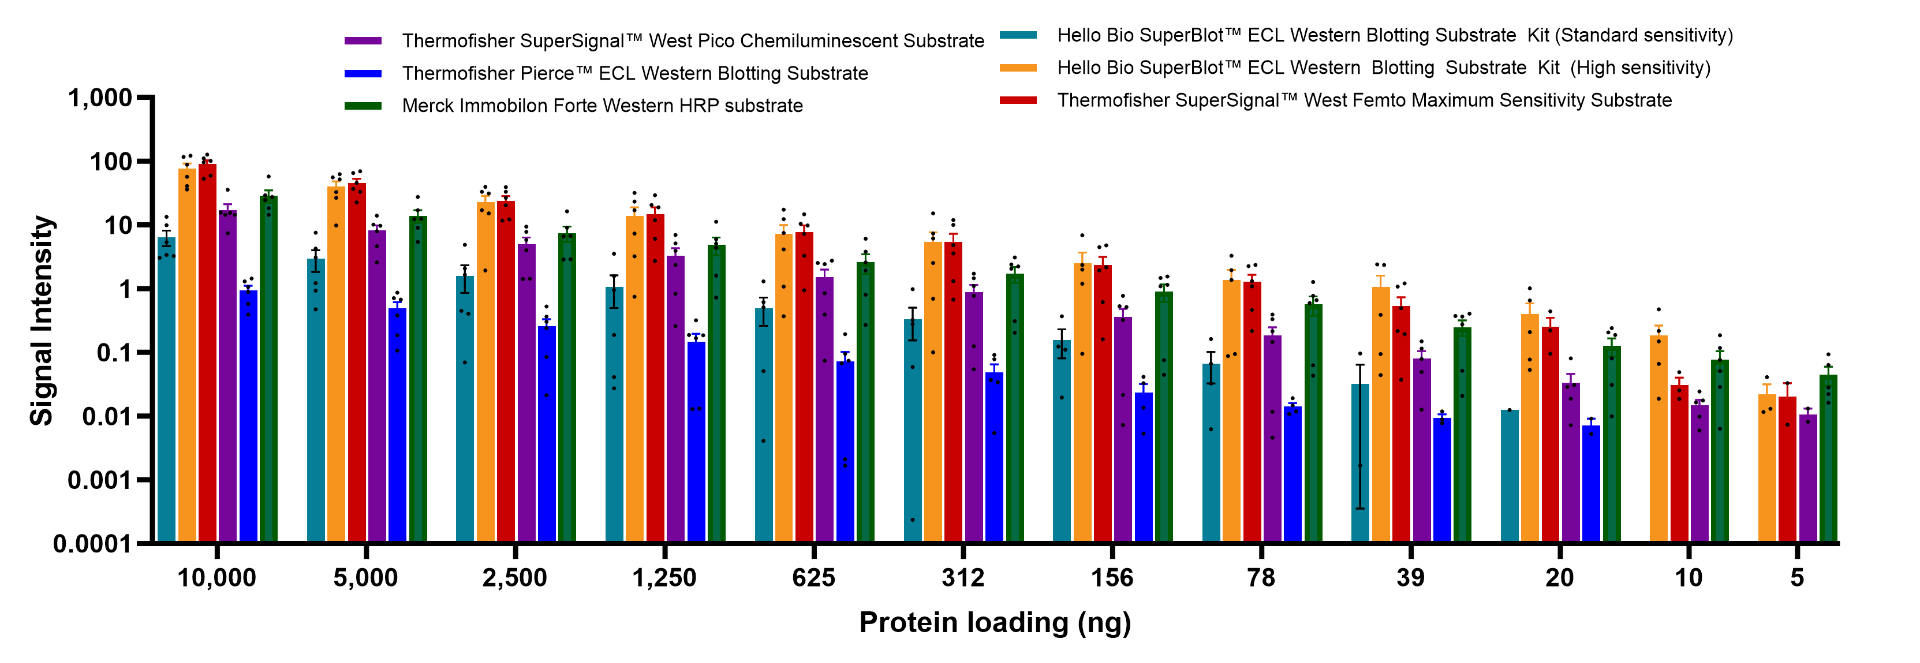 Figure 2. Fully counterbalanced comparison of Hello Bio ECL substrates with competitor products.